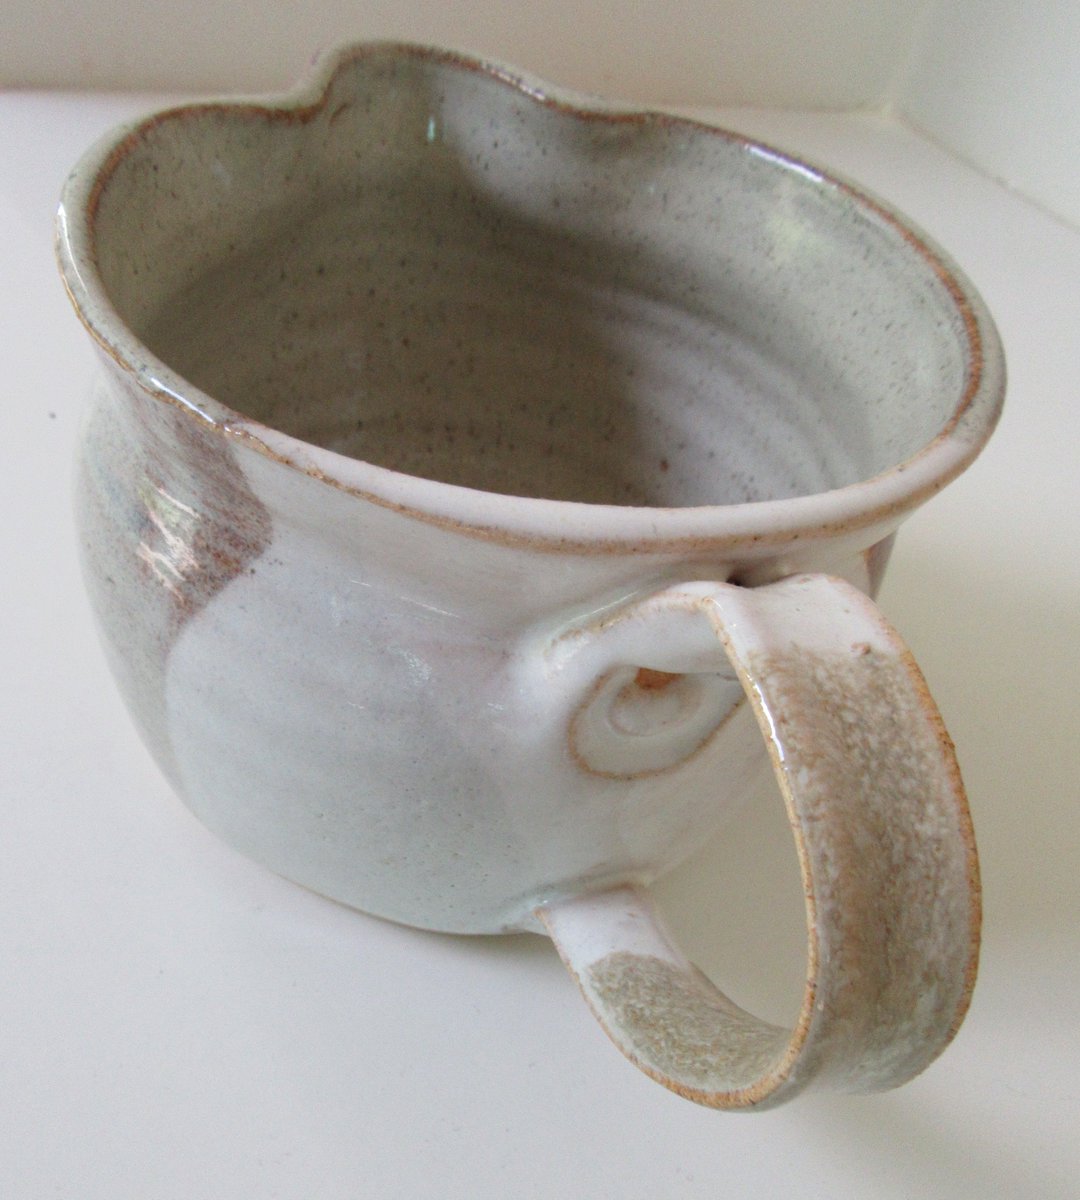 http://www.etsy.com/listing/195047095/hand-thrown-clay-milk-or-juice-pitche...